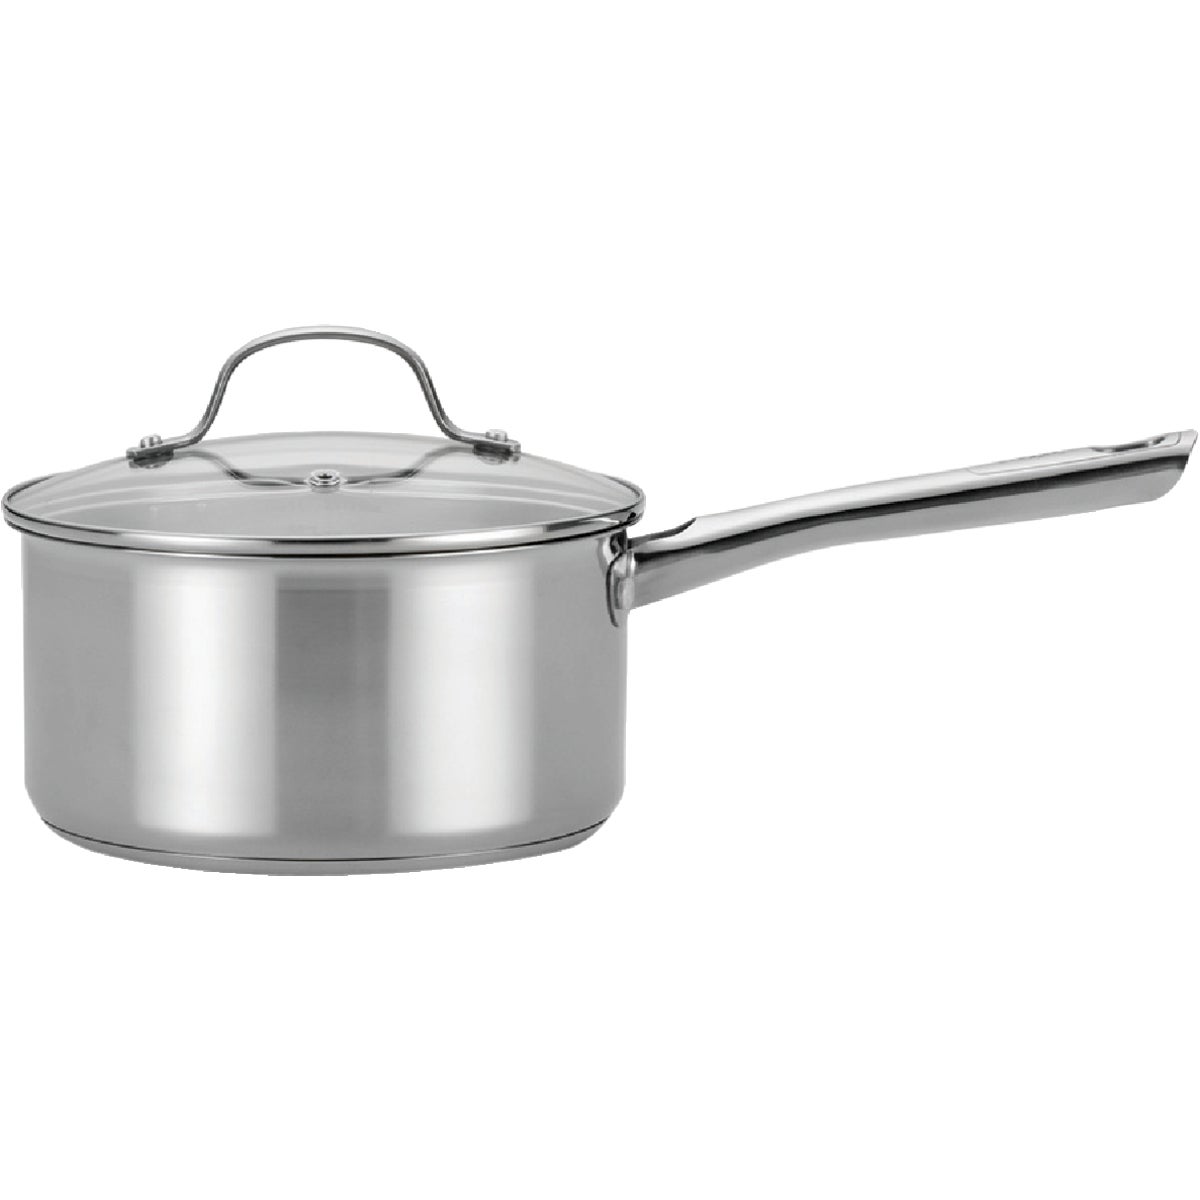 Item 603045, Stainless steel saucepan features the Techno Release raised pattern on the 